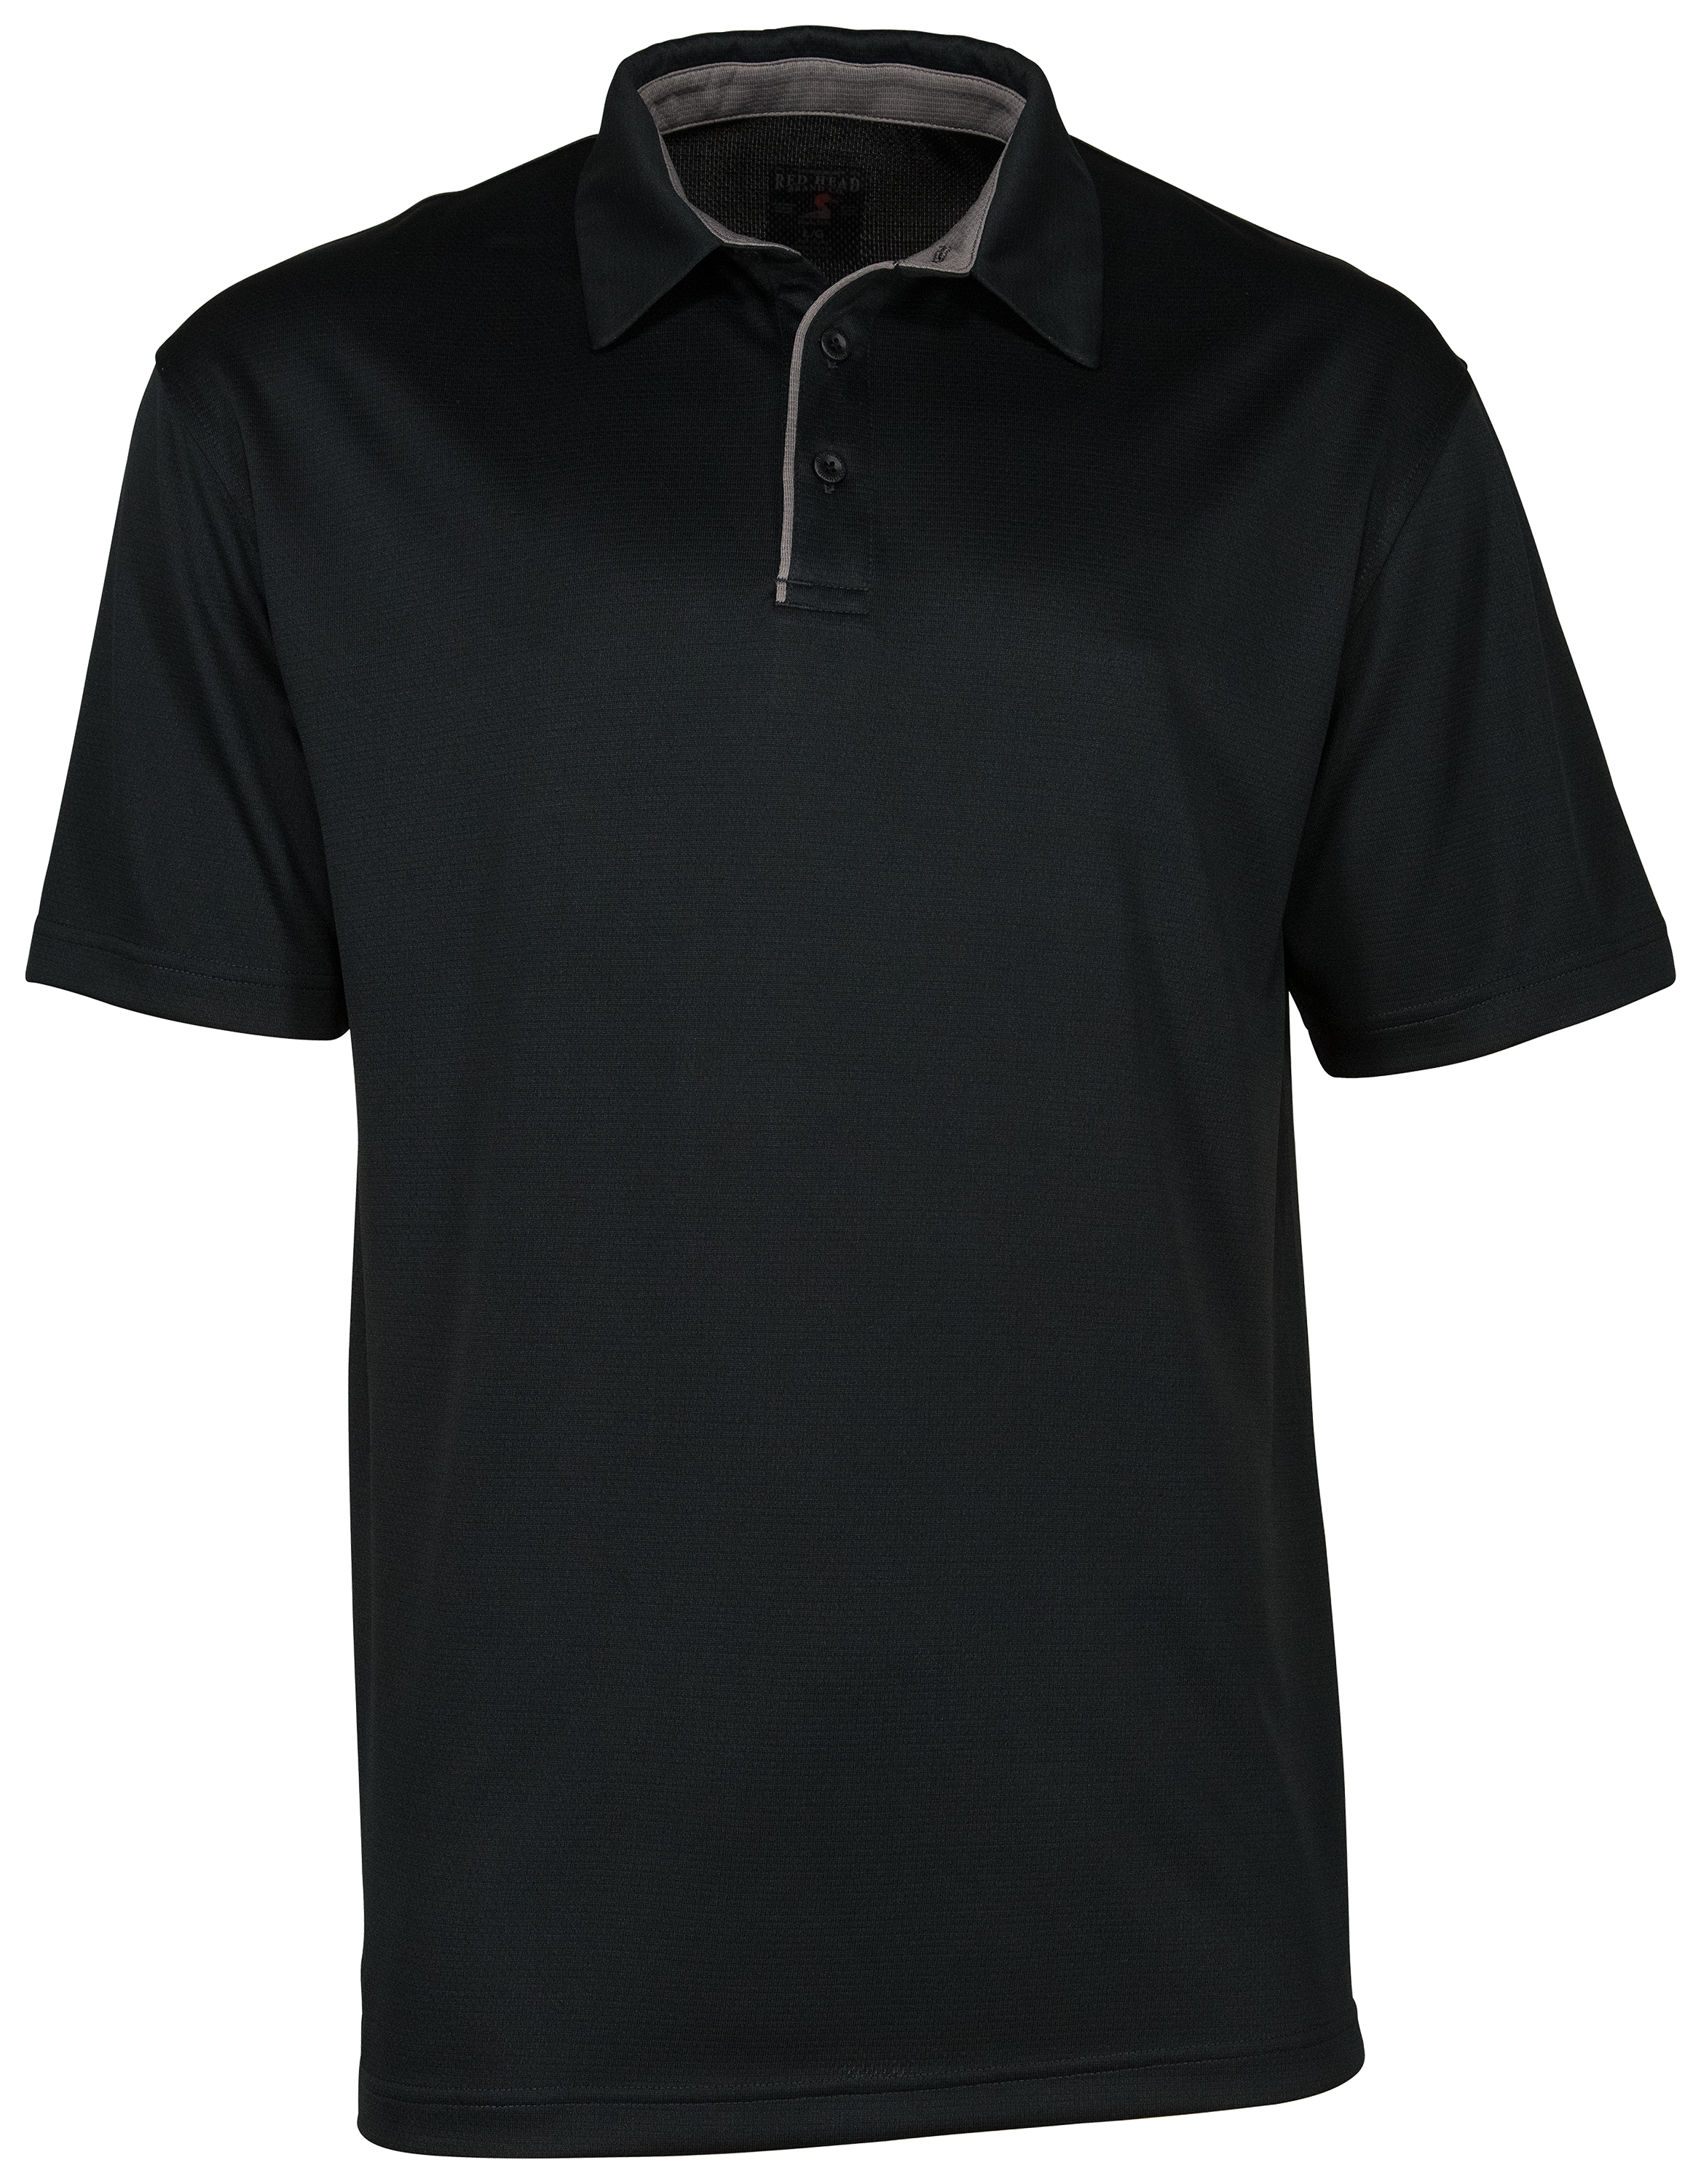 RedHead Performance Short-Sleeve Polo for Men | Bass Pro Shops